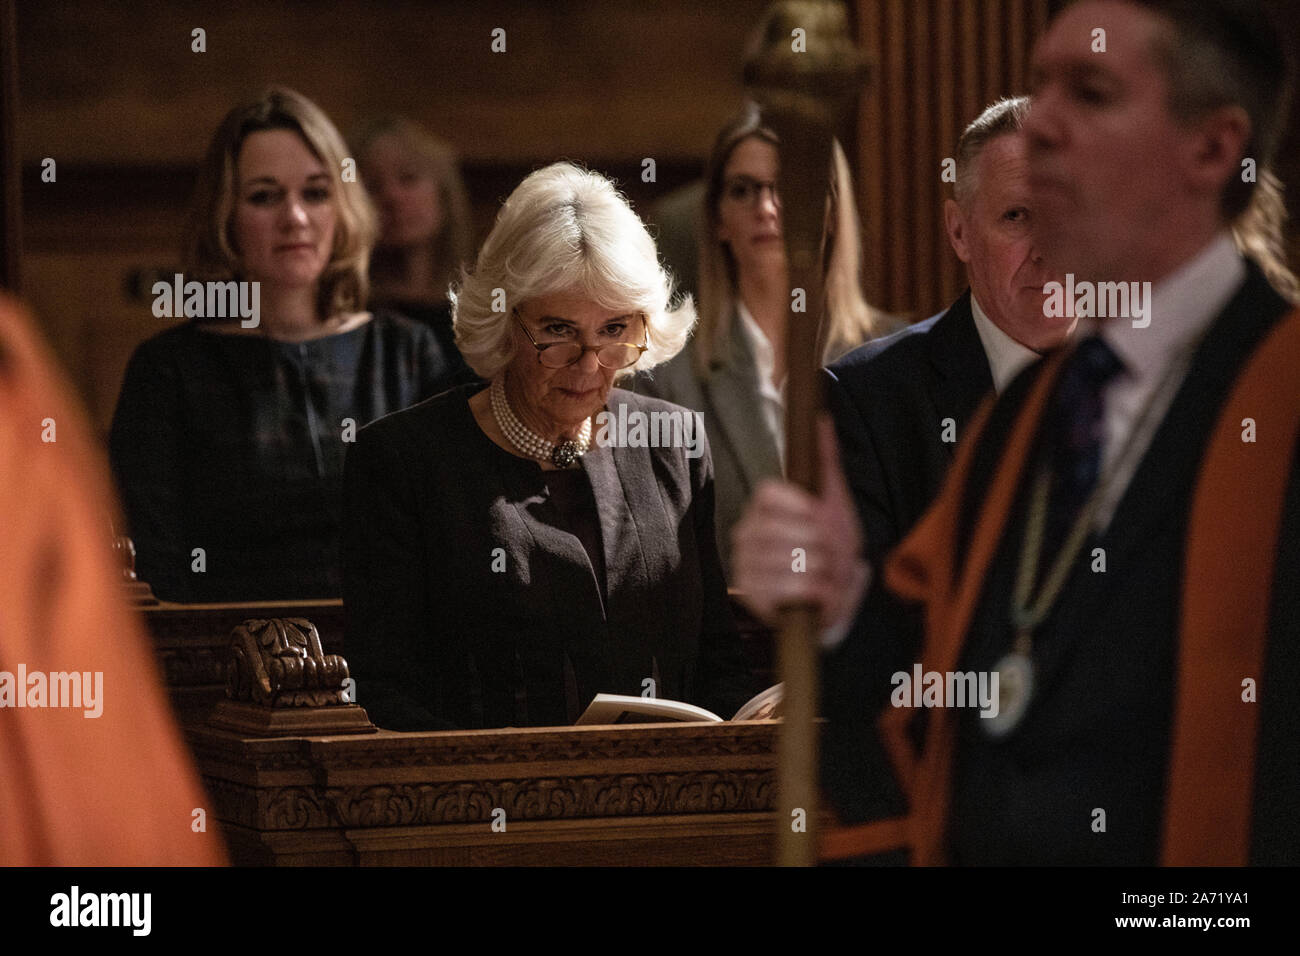 London, UK. 29th Oct, 2019. St Bride's Church, Fleet Street - Picture shows Camilla, Duchess of Cornwall sat with Baron Black of Brentwood , Executive Director of Telegraph Media Group attending a Service of Remembrance Celebration to commemorate and support the journalists, photographers, camera-crew and support staff whose mission it is to bring us the news. Credit: Jeff Gilbert/Alamy Live News Stock Photo